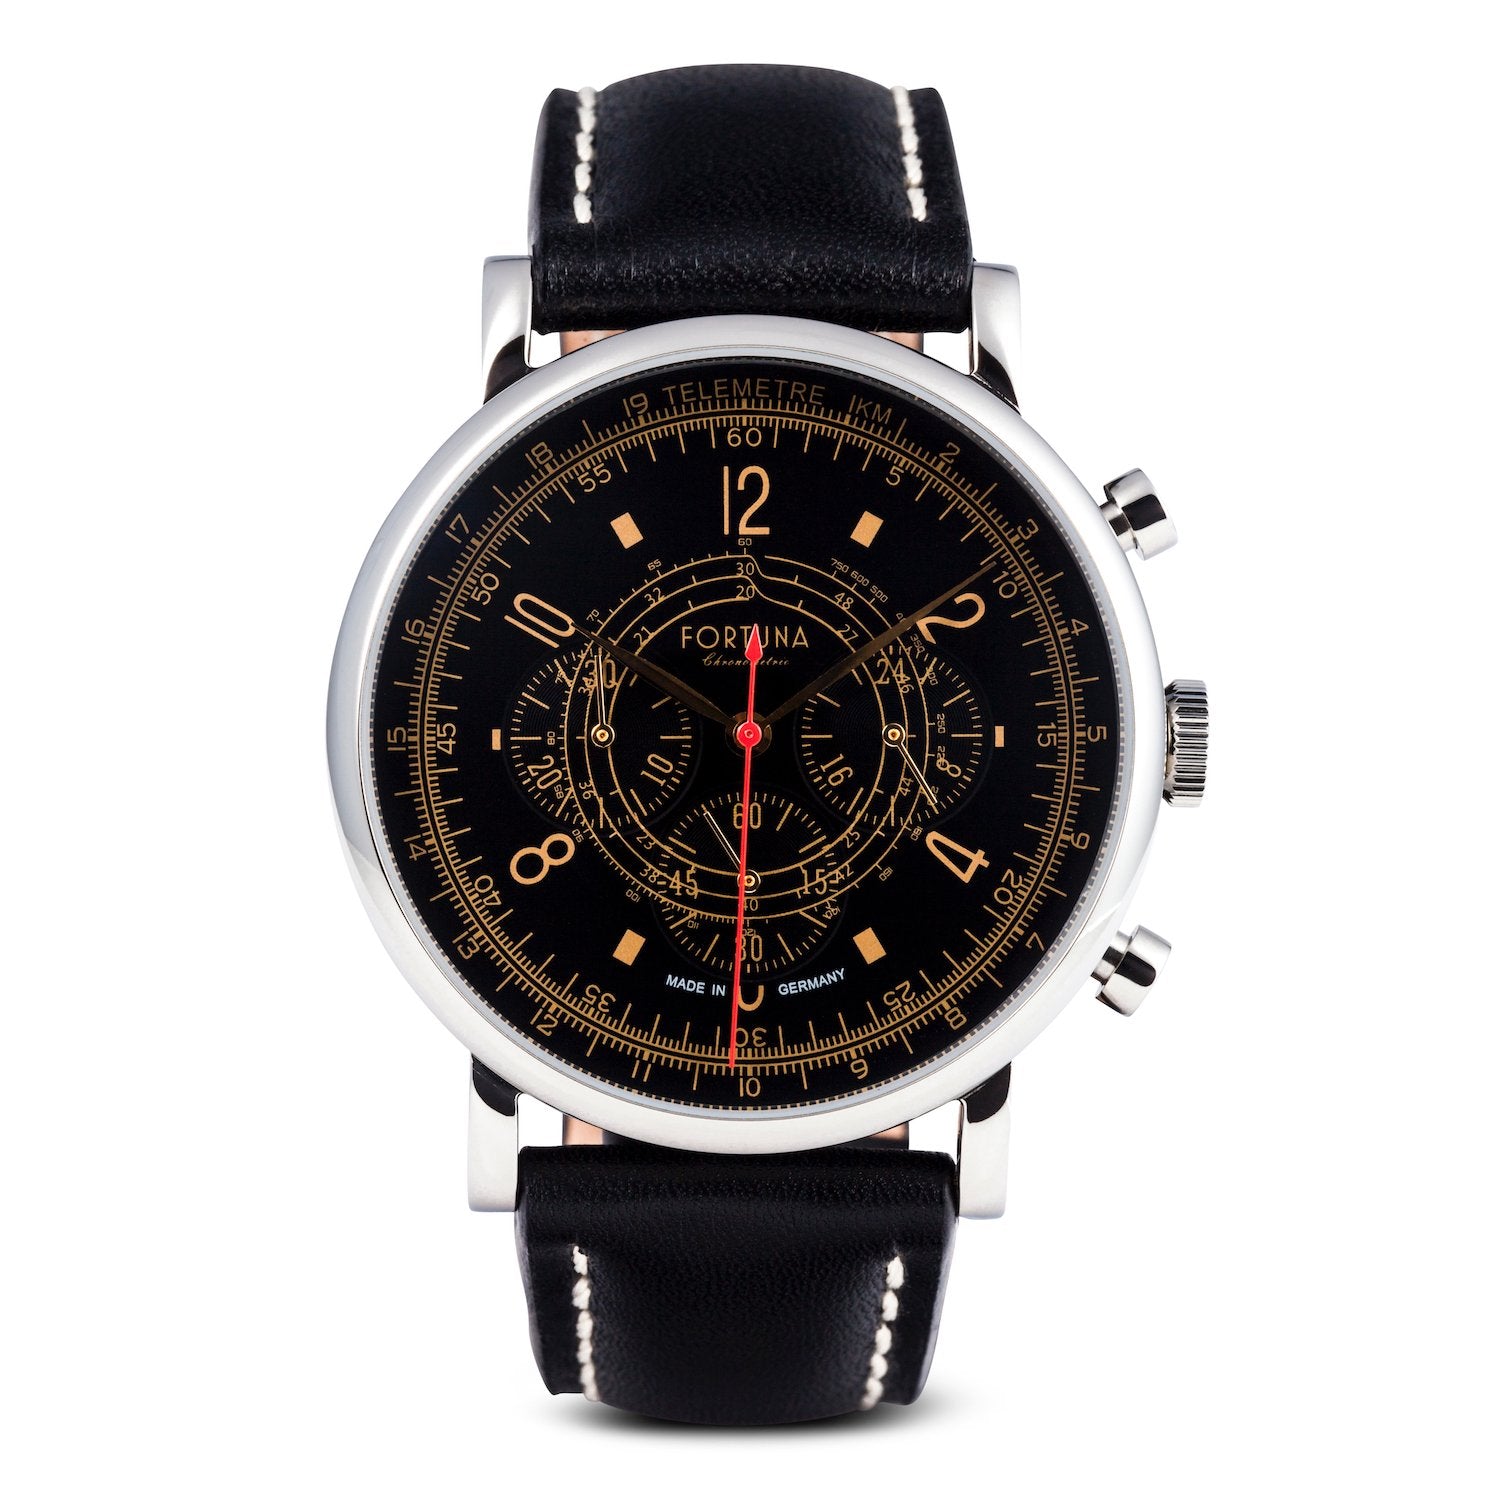 GEREON by Fortuna - Collection Chronometrie SIMPLEX